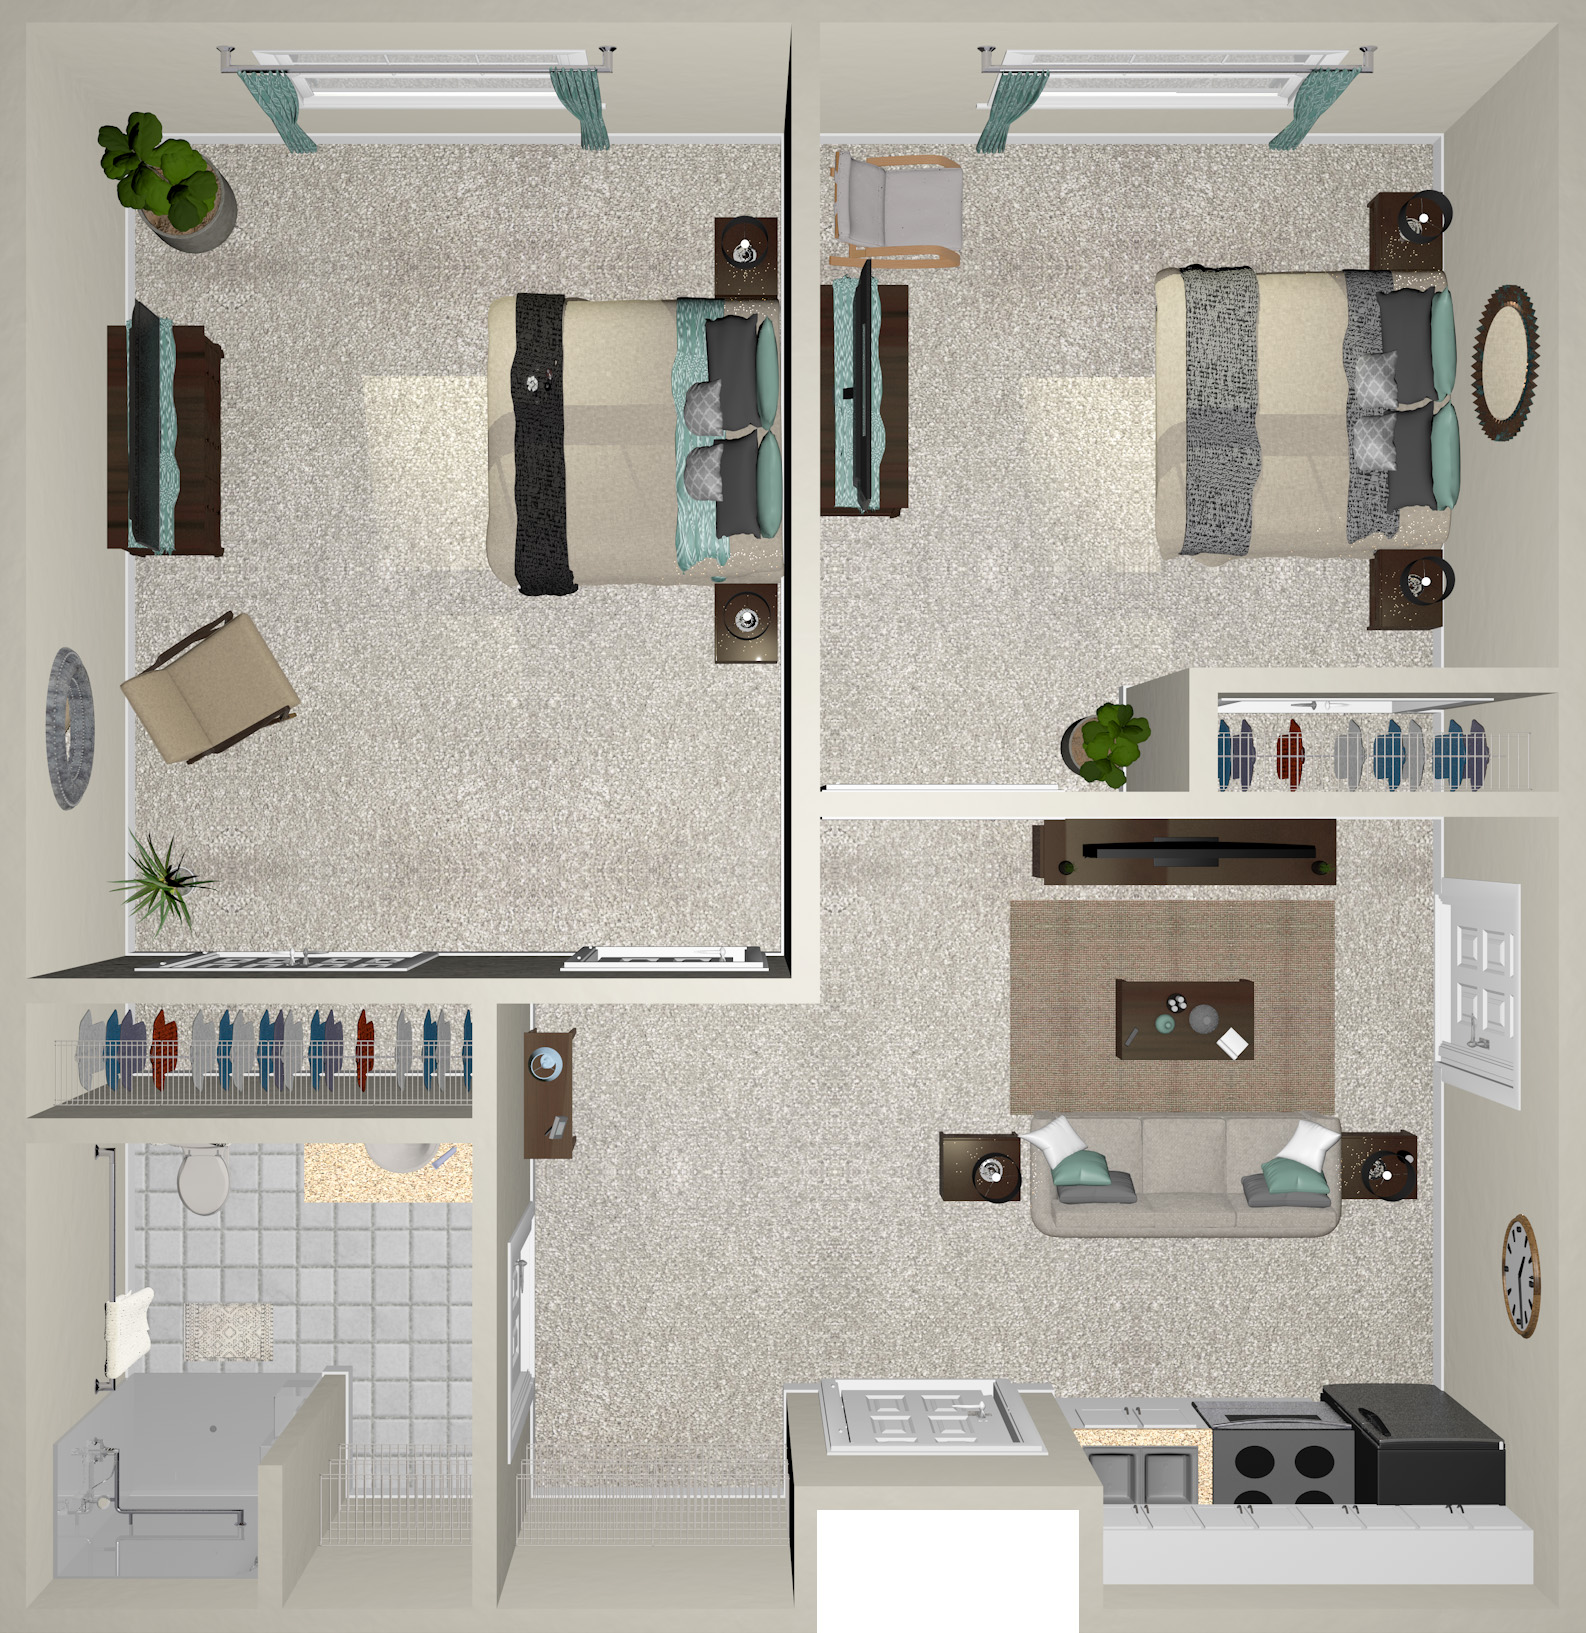 Personal Care Two Bedrooms - 660 Sq. Ft.